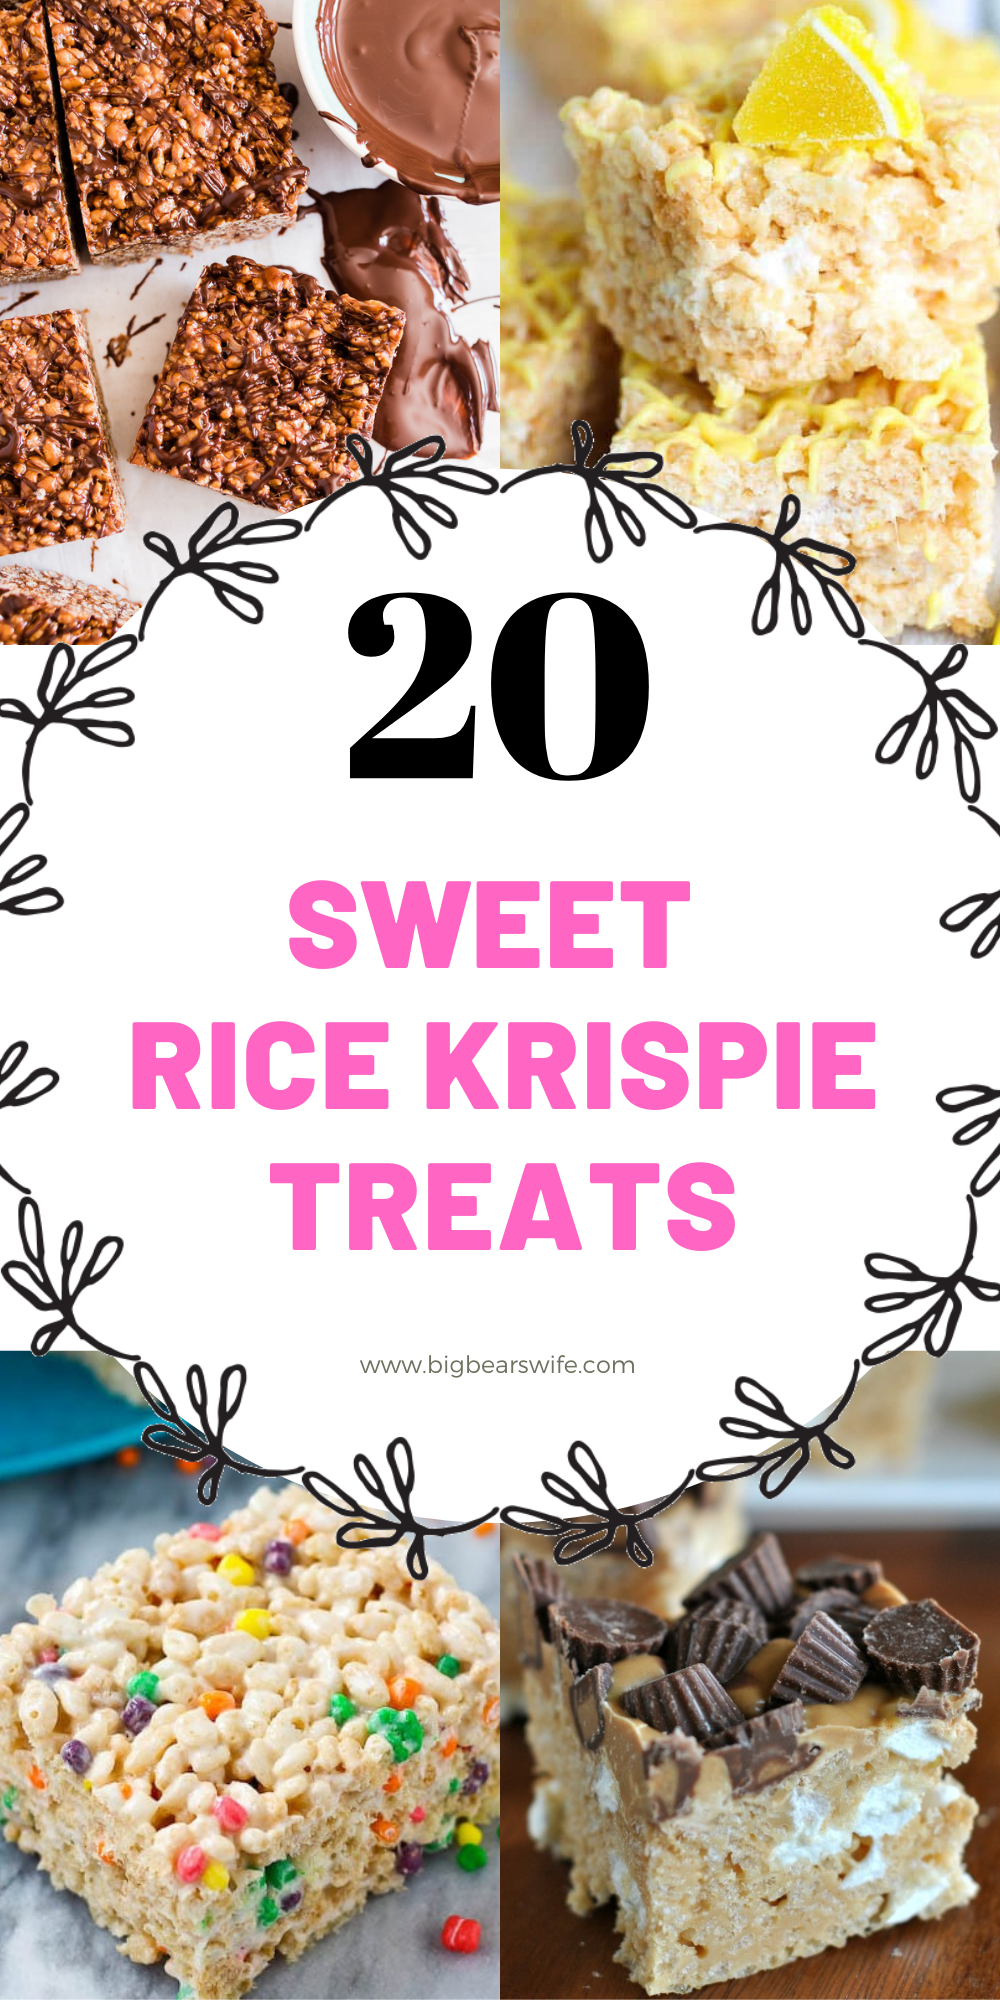 Cereal, Melted Marshmallows and Butter pressed into a perfect little treat! What could be better than a homemade rice krispie treat? If you love rice kripsie treats, I can't wait for you to see these 20 Sweet Rice Krispie Treats recipes! via @bigbearswife